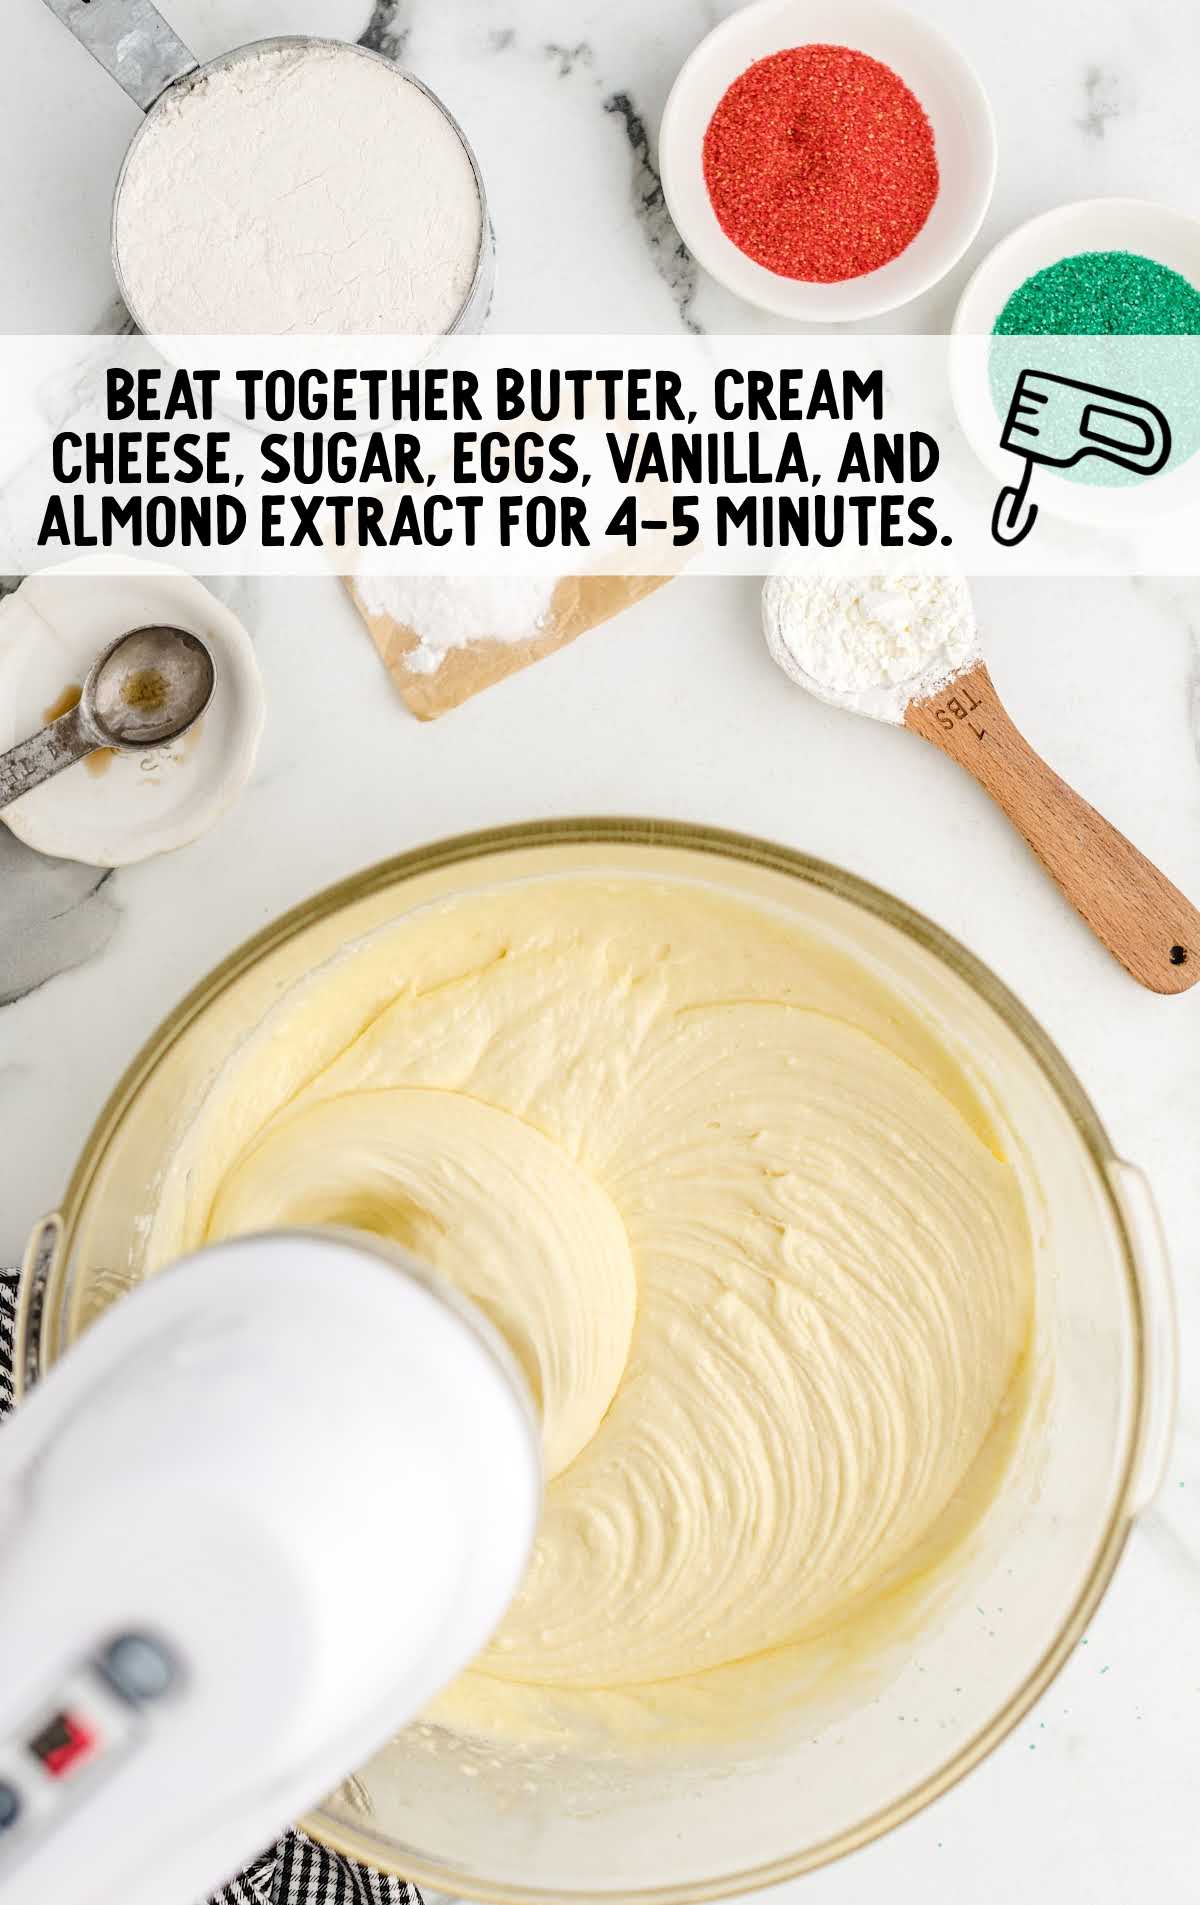 butter, cream cheese, sugar, eggs, vanilla, and almond extract blended together in a bowl